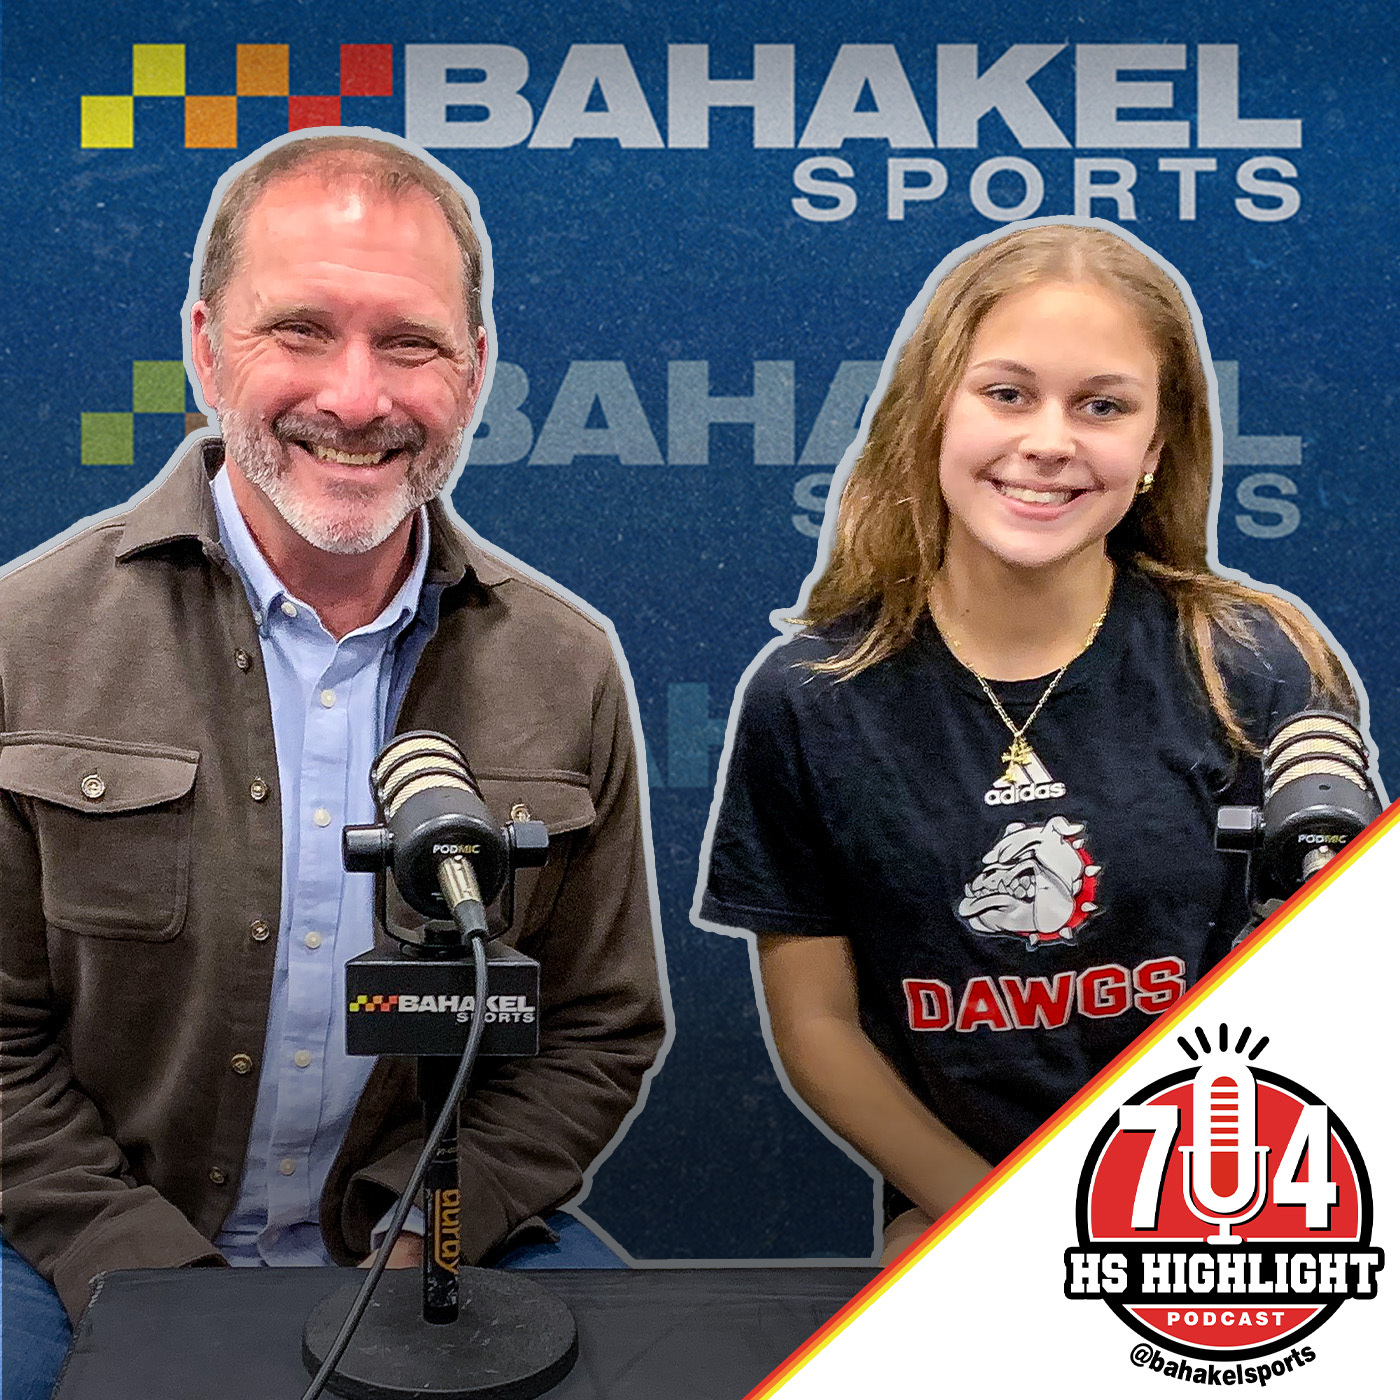 The Challenge Of Being The Multi-Sport Athlete With Gracie Clemmer | 704 HS Highlight Podcast